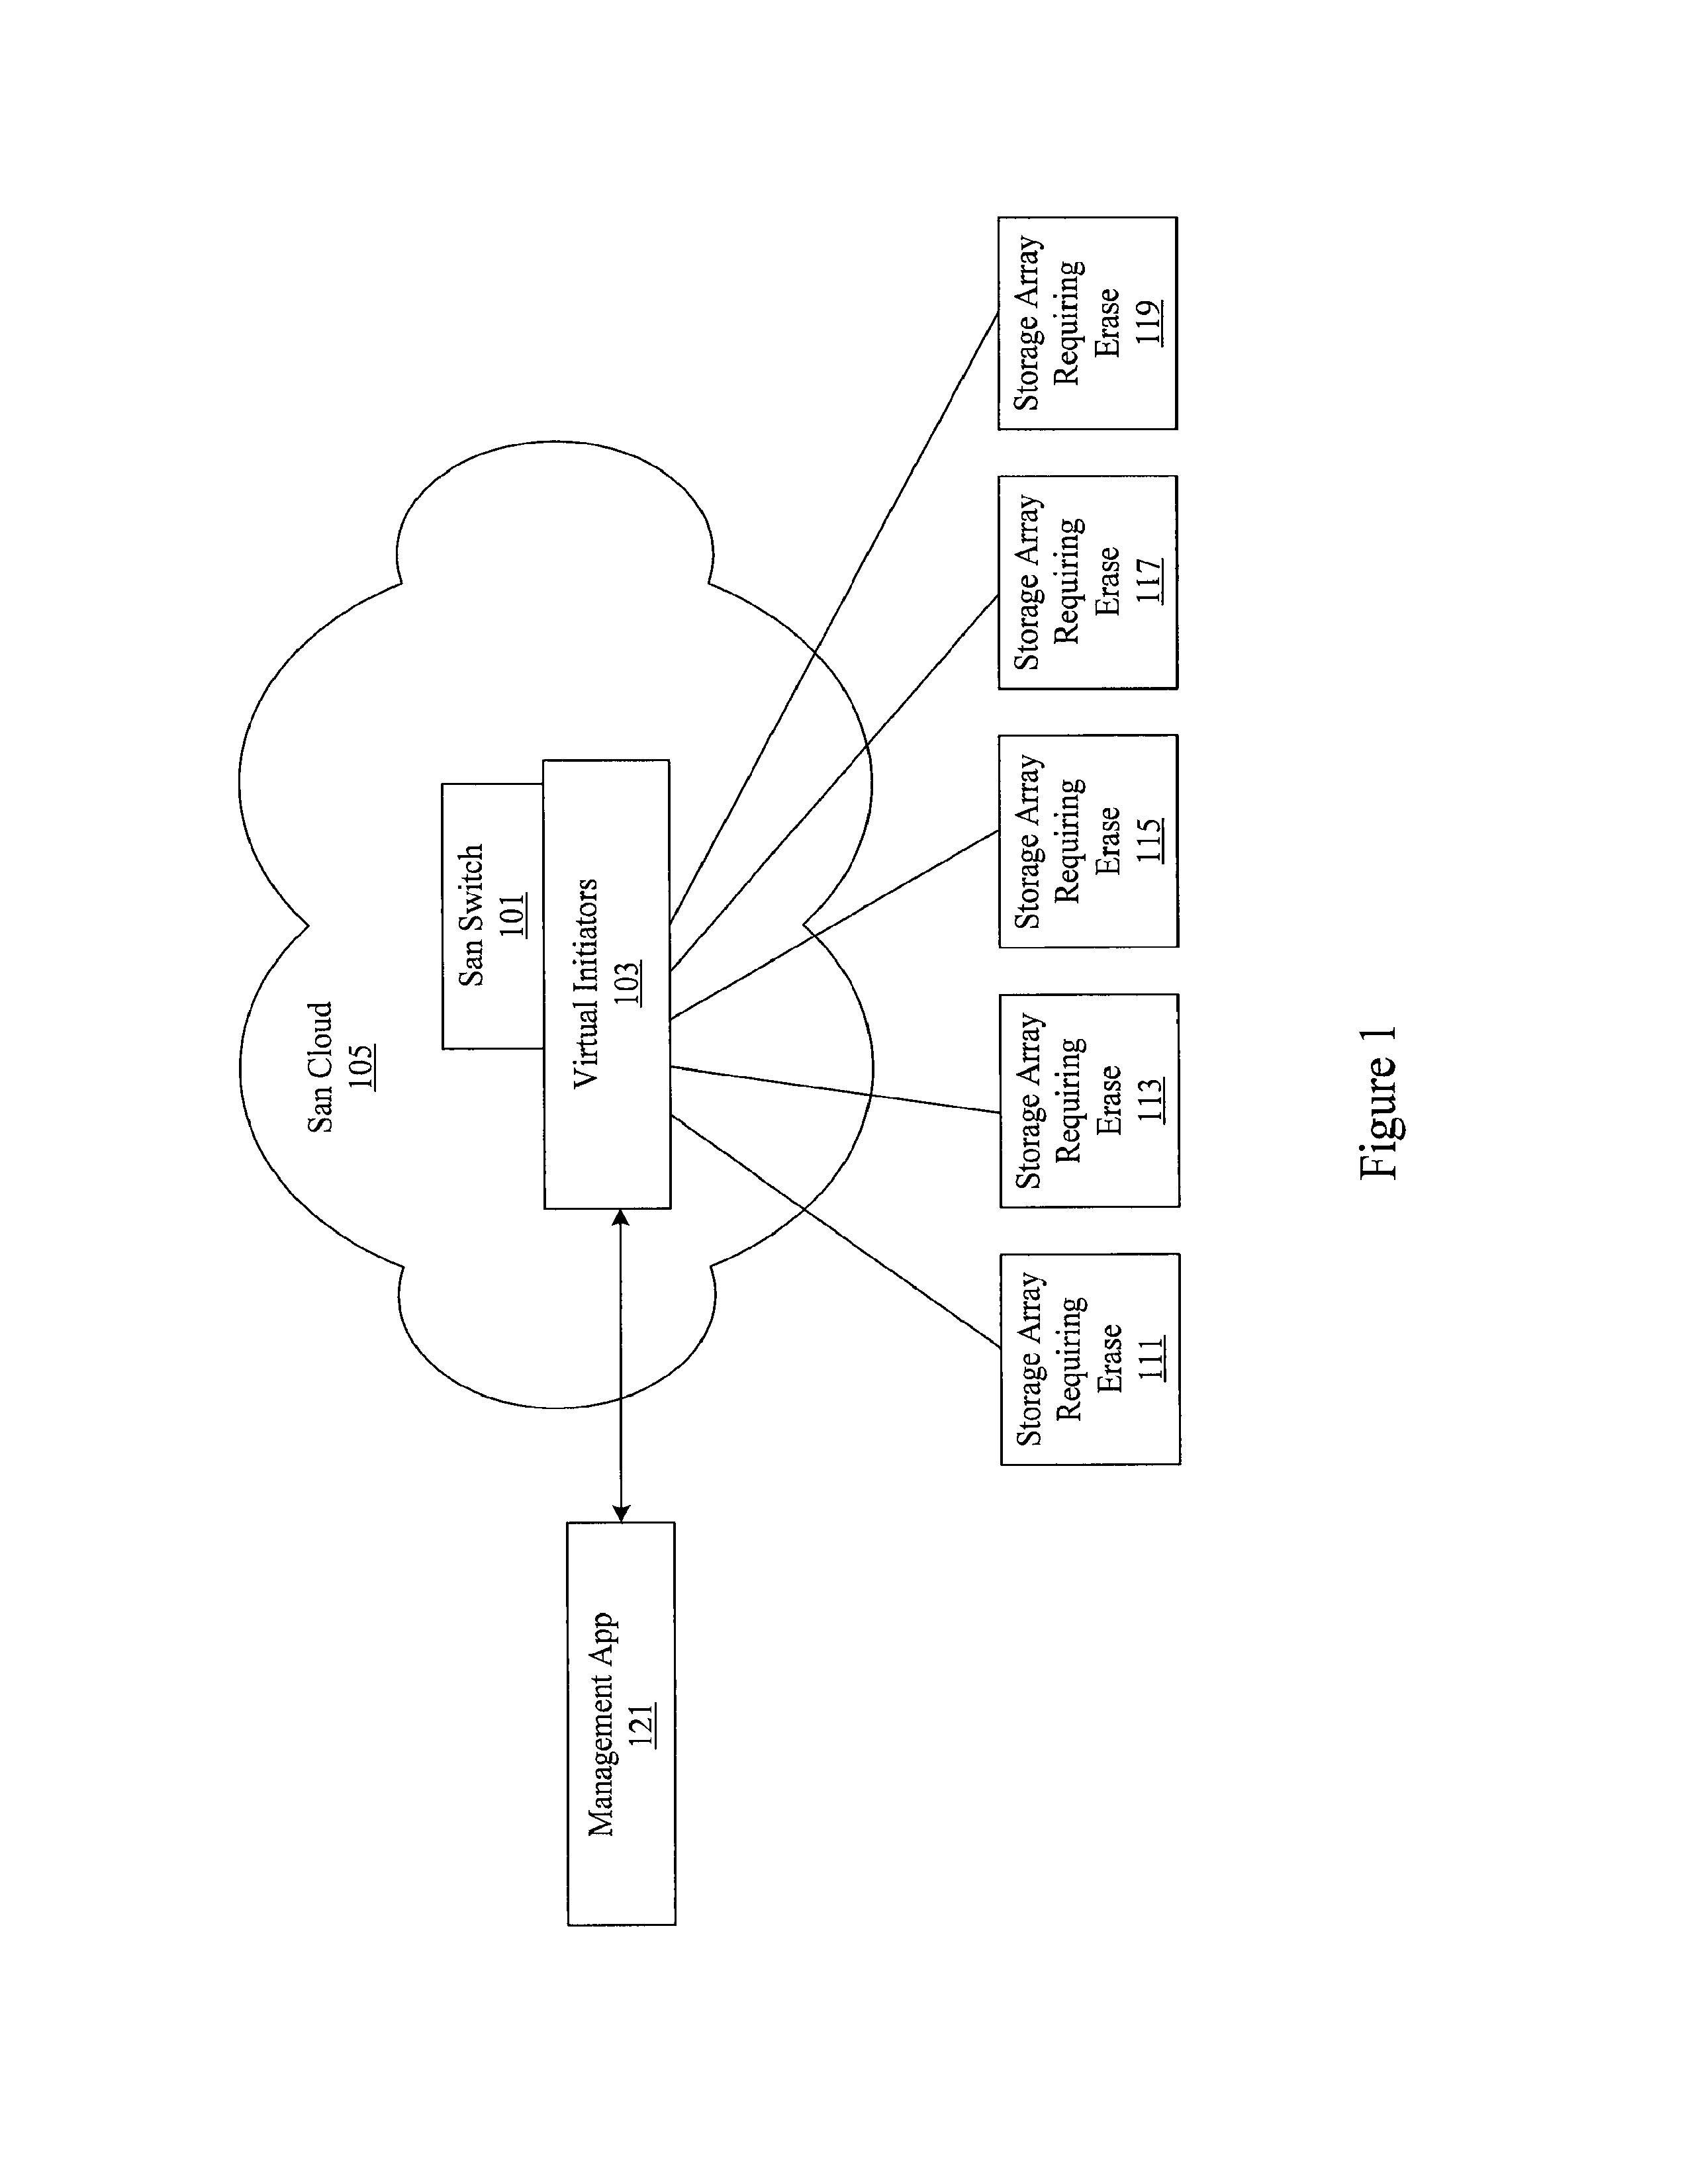 Storage area network (SAN) switch multi-pass erase of data on target devices